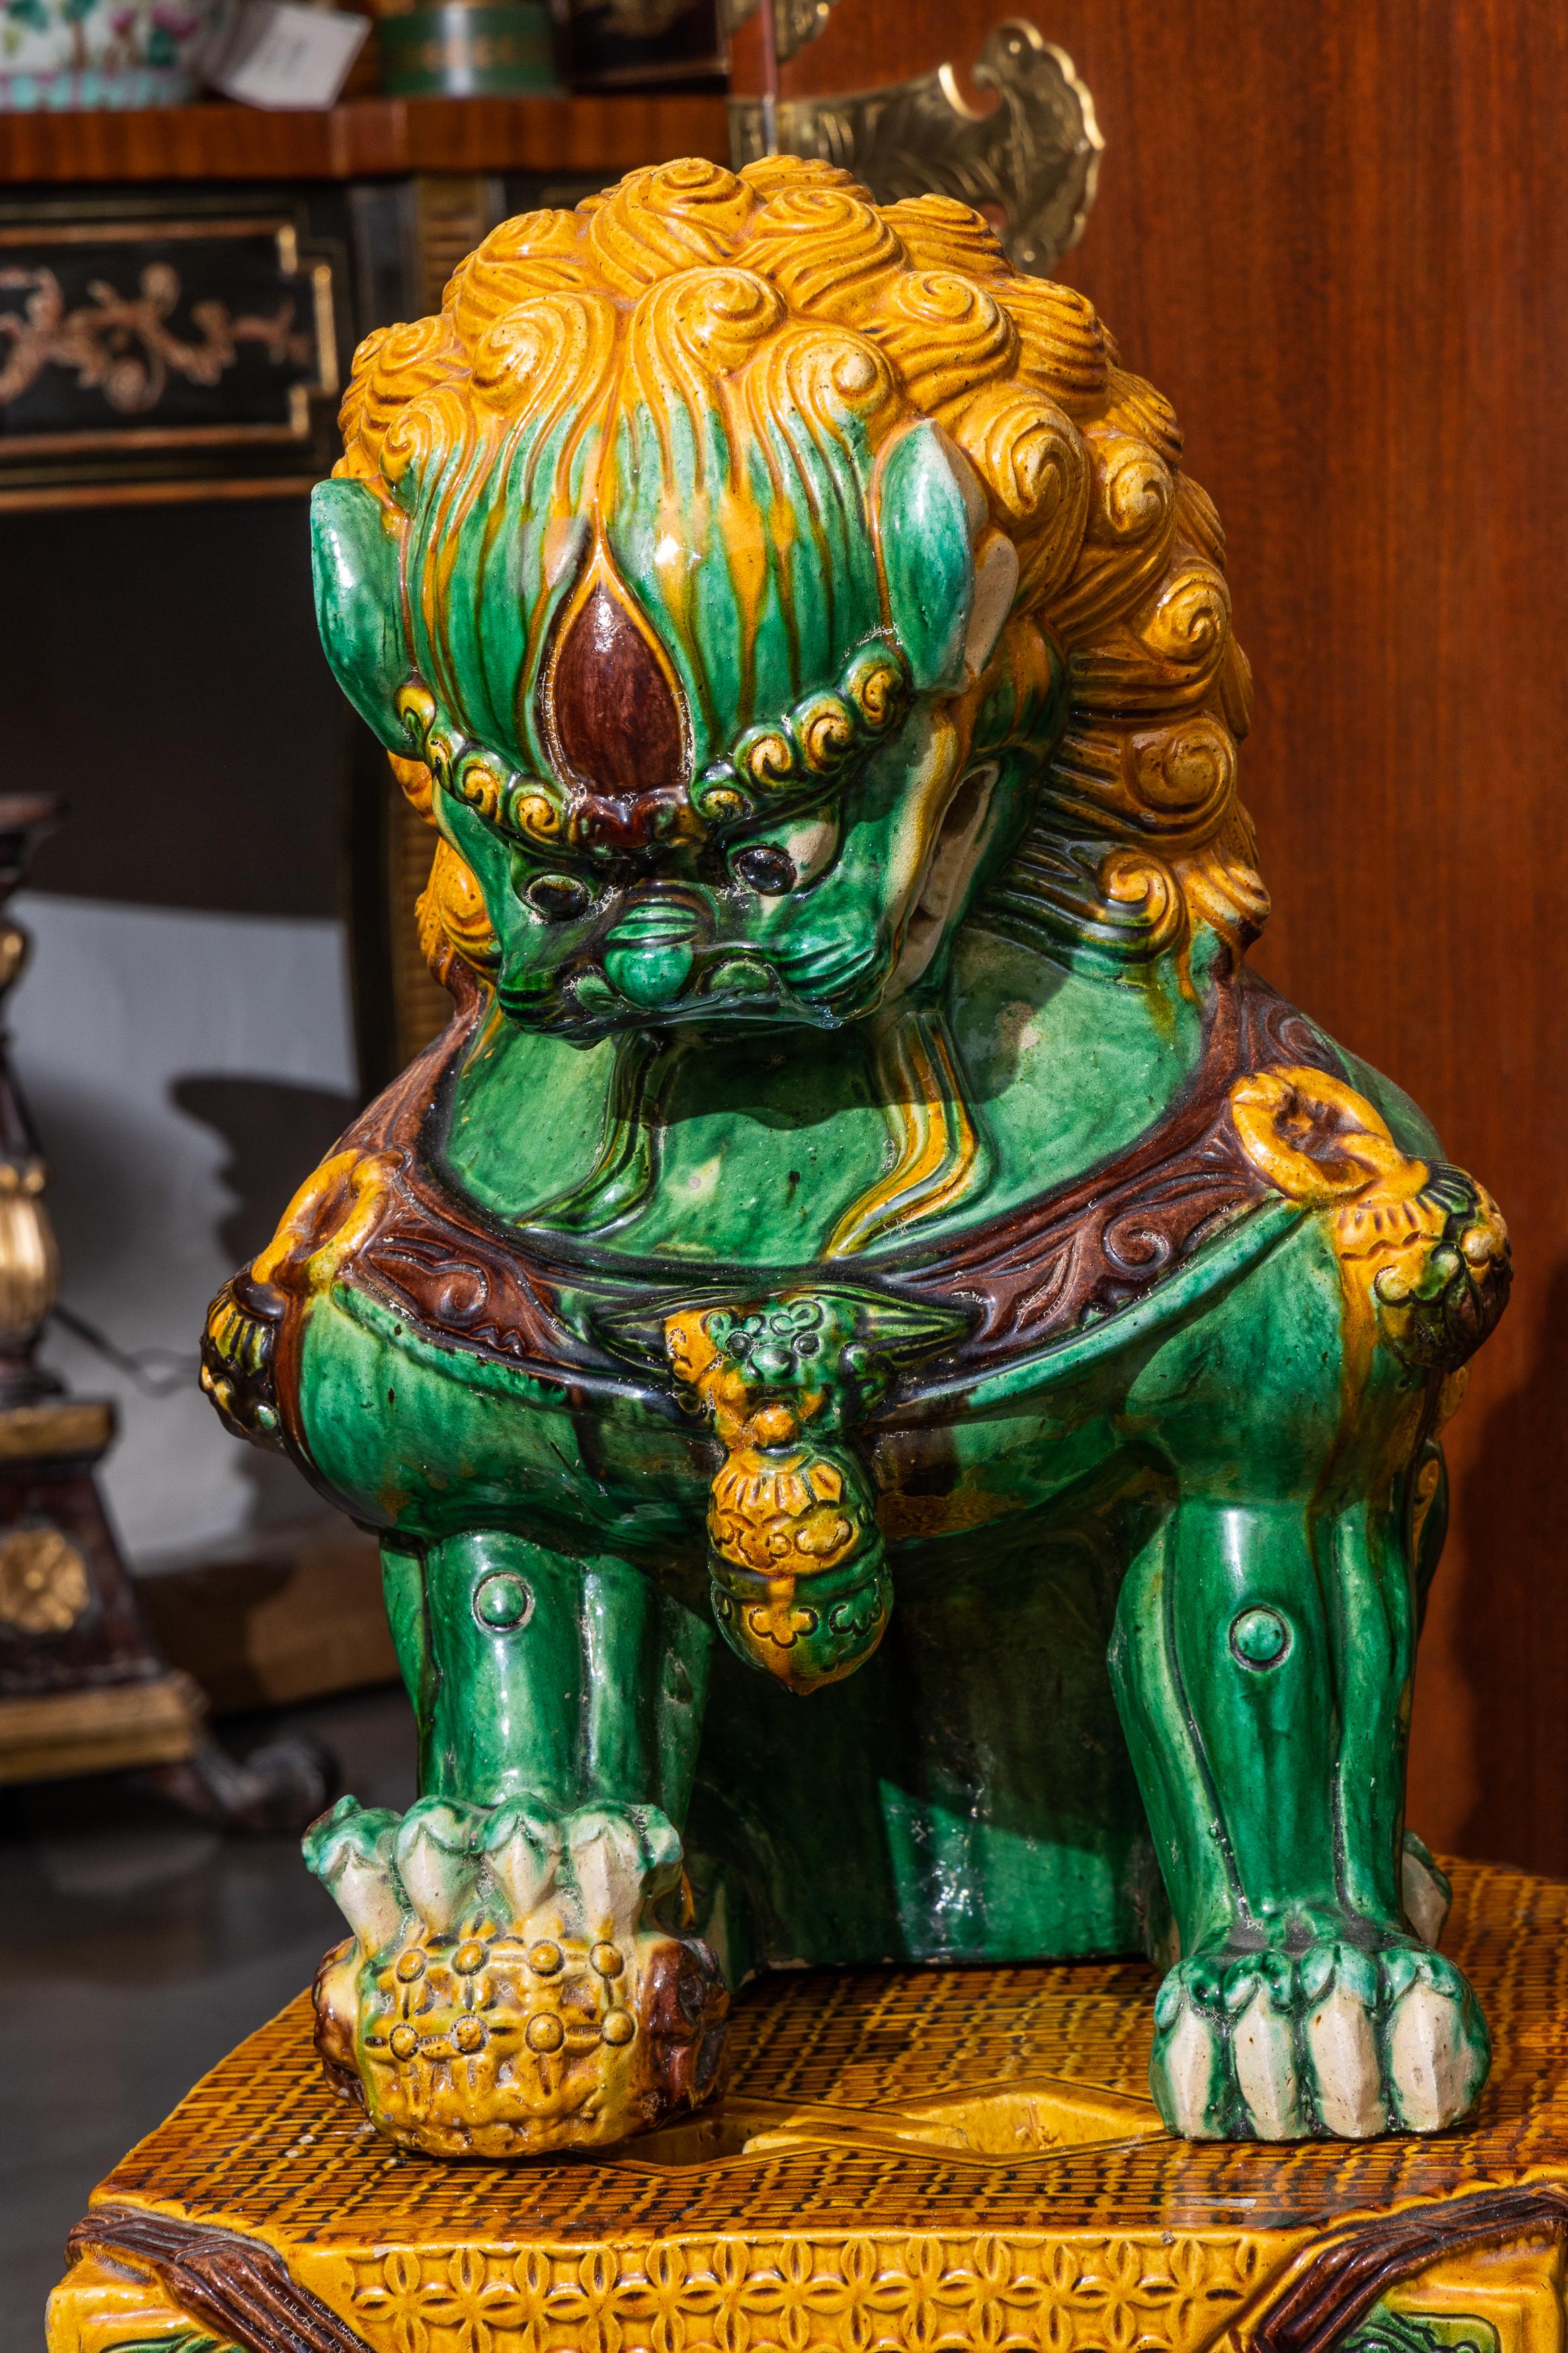 This is a handsome pair of vintage Chinese ceramic foo lions hand-painted in traditional green and color colors under a glaze.  The figures are situated in a regal position atop an impressive plinth.